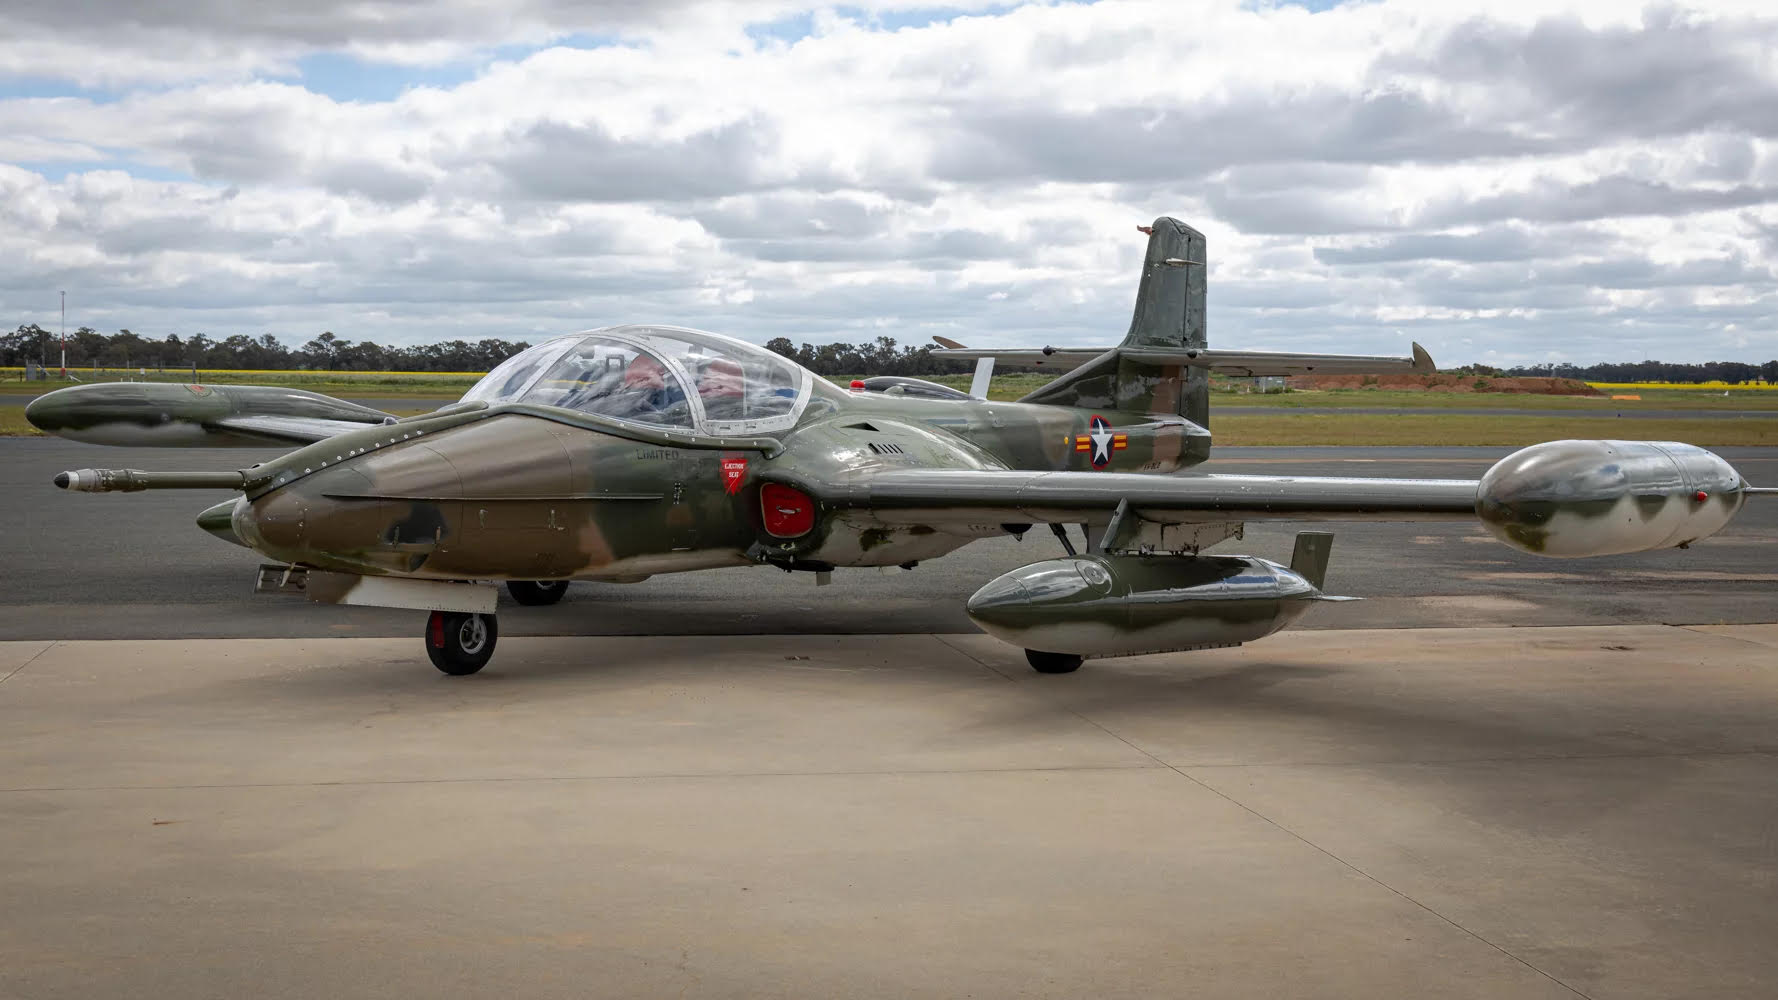 1969 Cessna A37B Dragonfly Military Aircraft For Sale